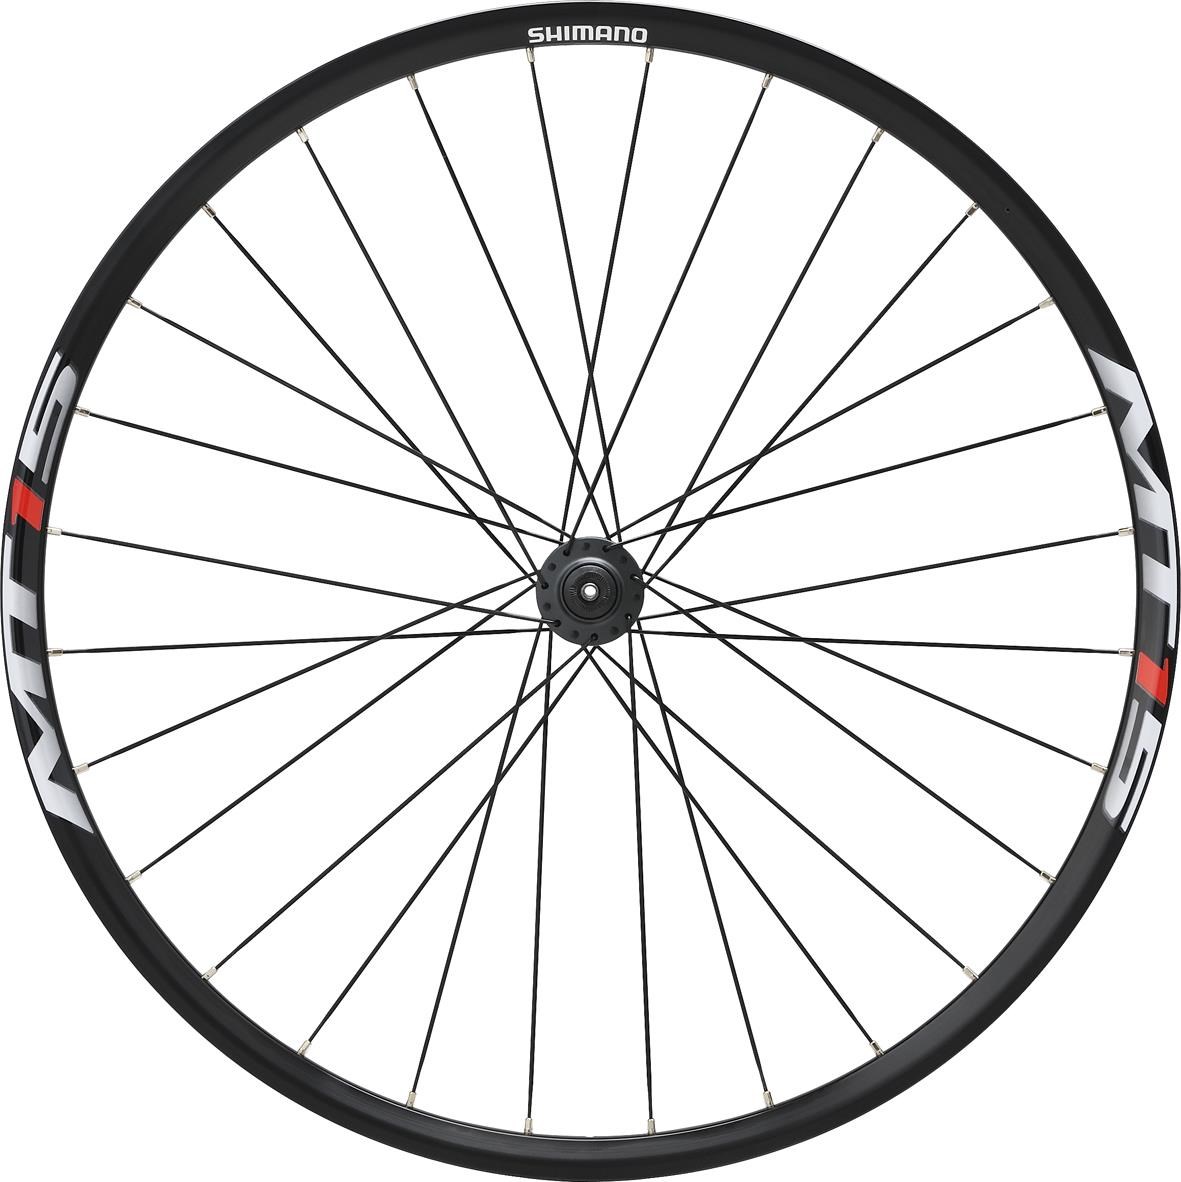 Shimano WH-MT15 XC Wheel - Q / R 100 mm Axle - 27.5in (650B) Clincher - Black - Front